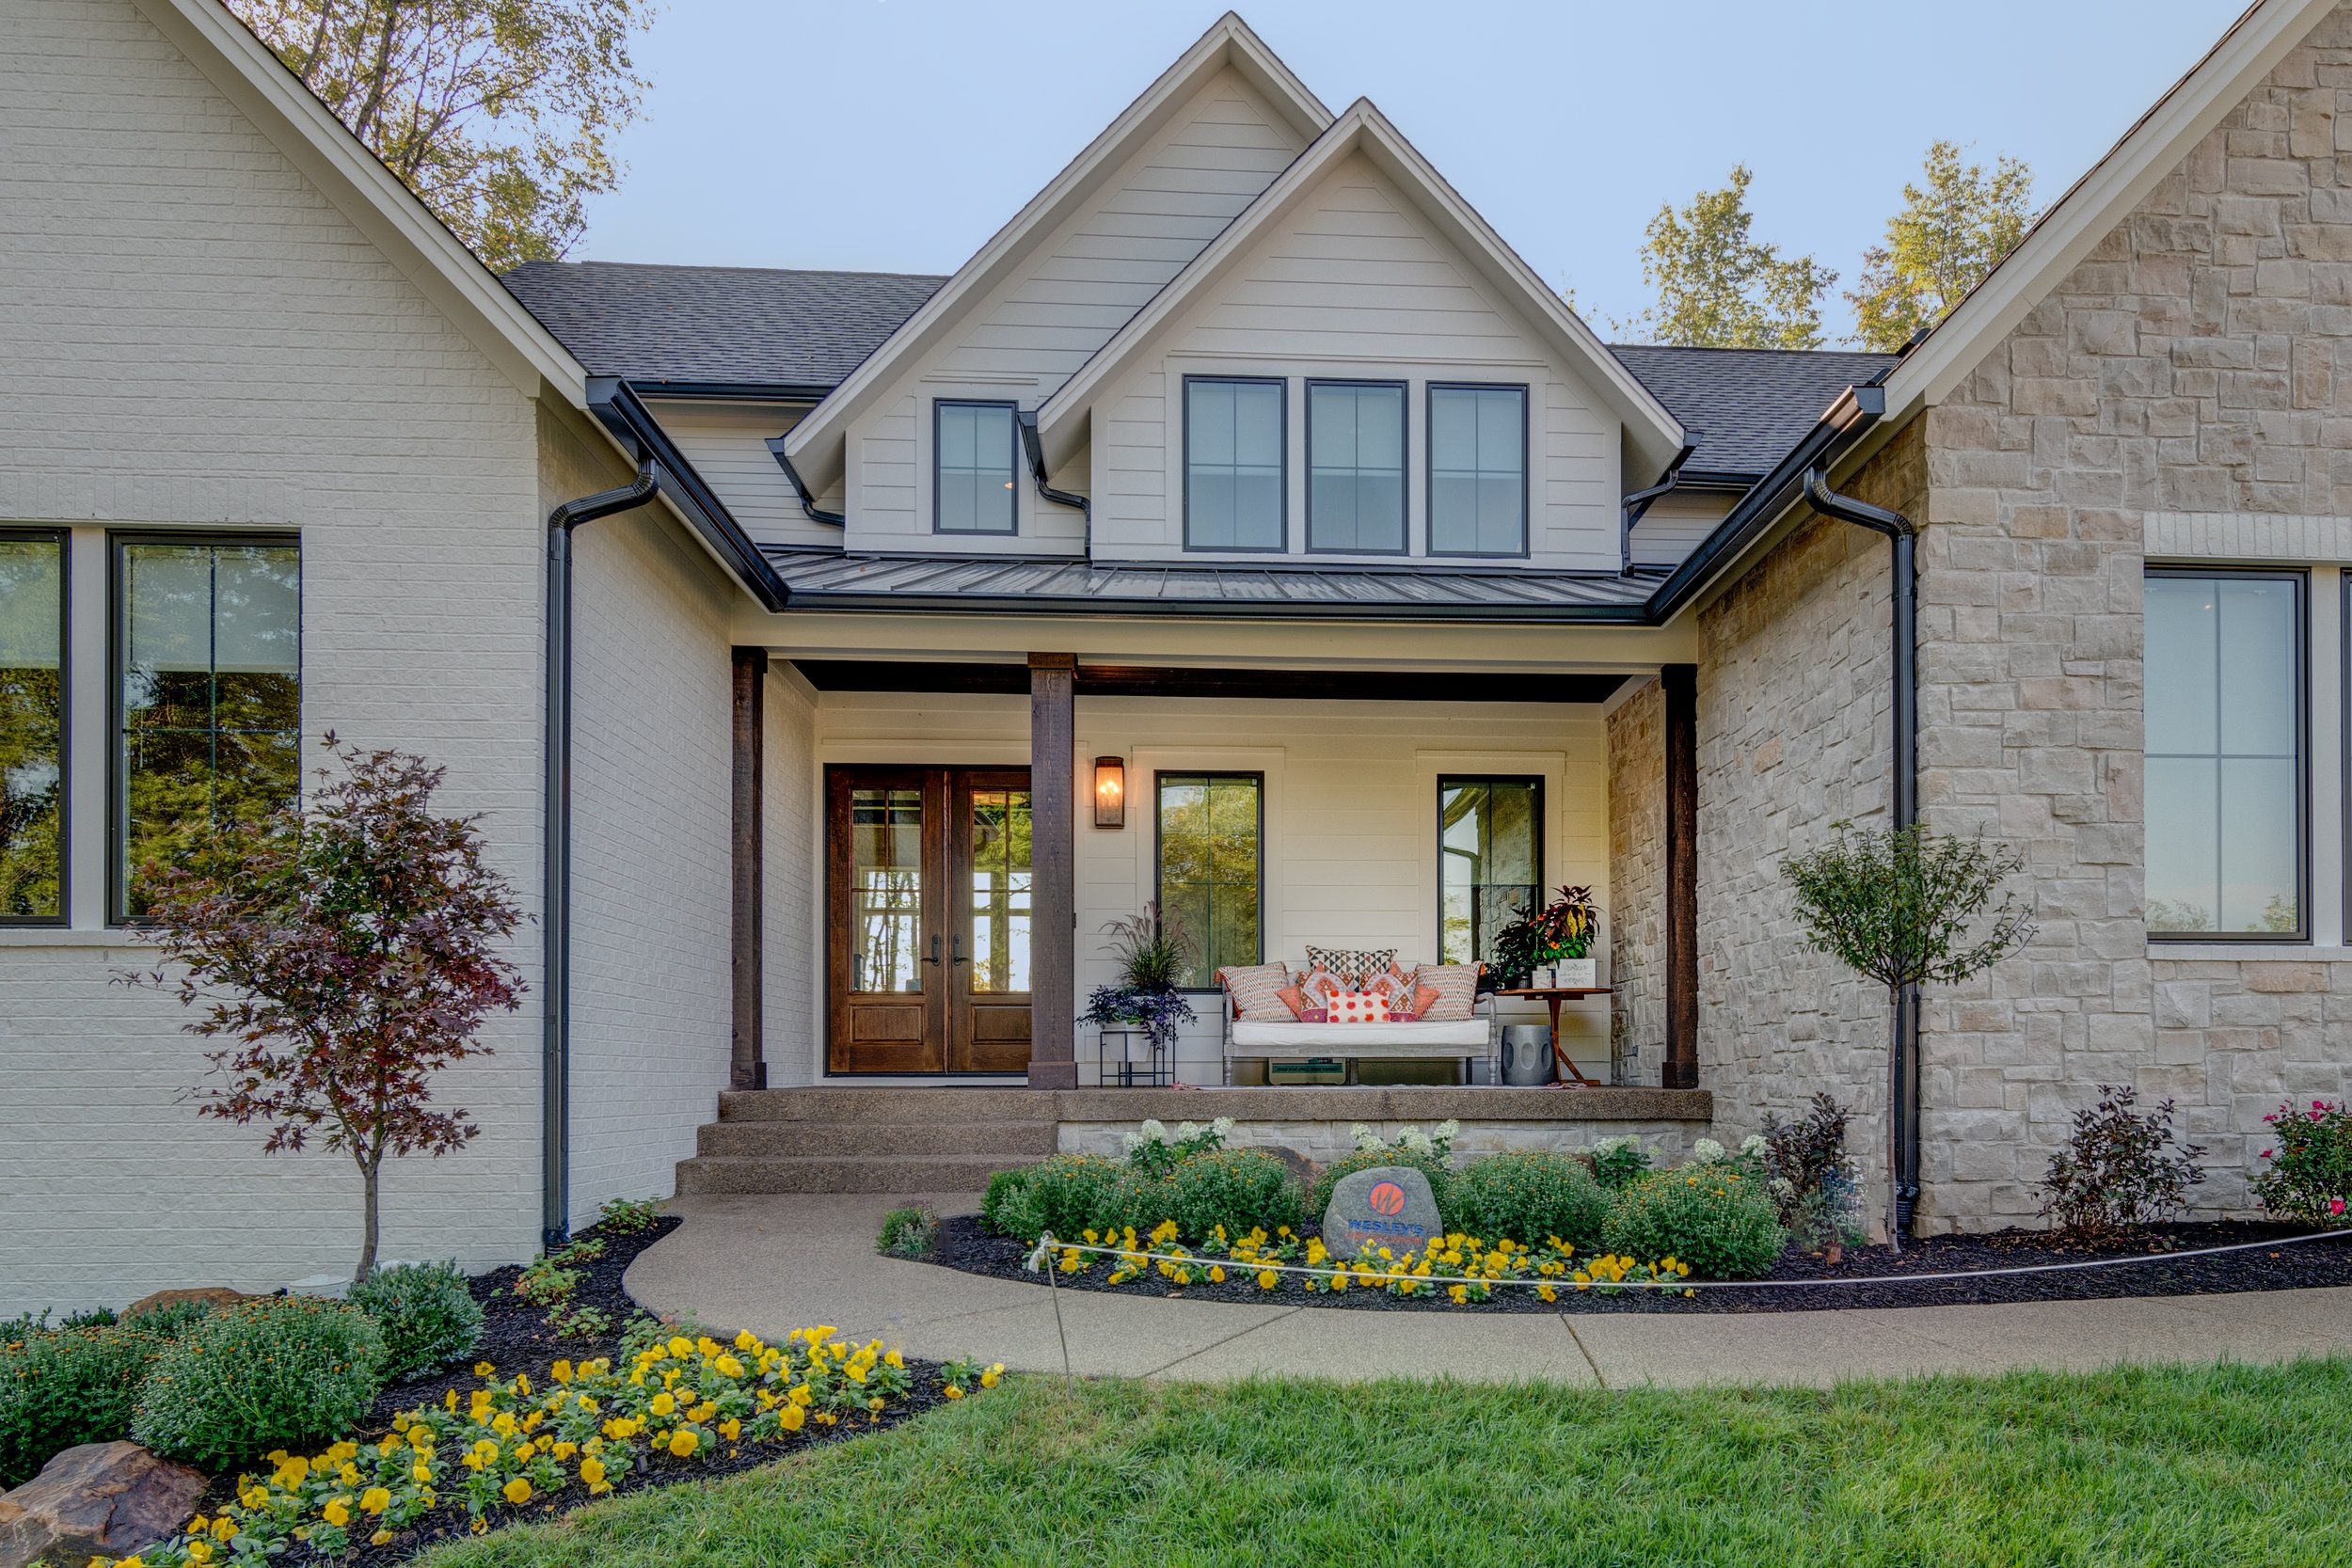 A custom home with a front porch and landscaping for sale in Carmel Indiana.